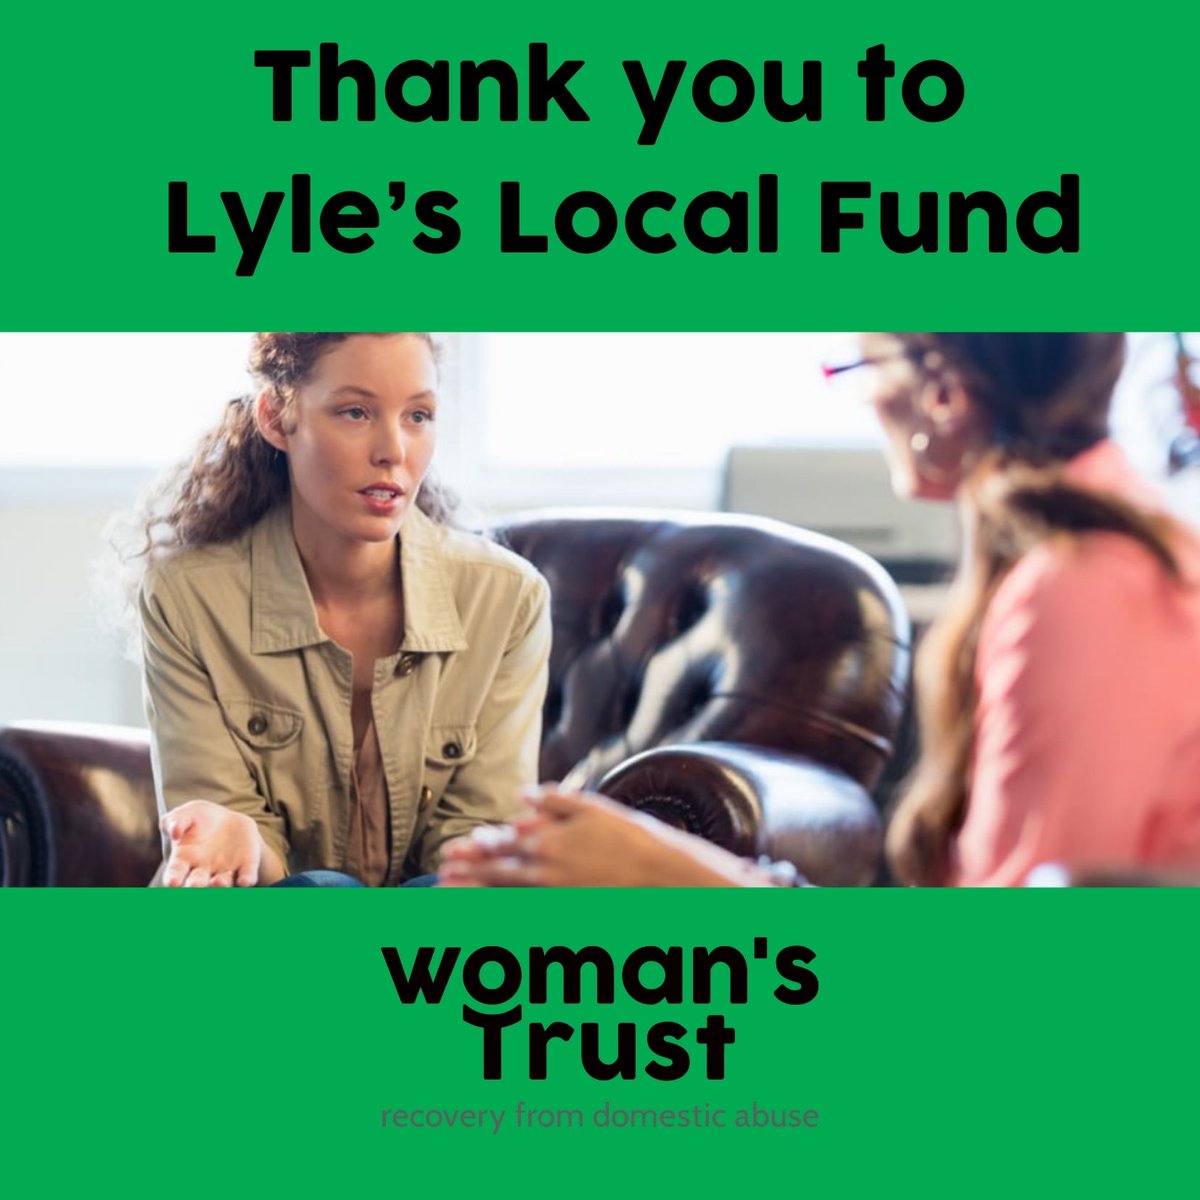 We're delighted that we have been successful in the #LylesLocalFund award from @TateLyleSugars The award will go directly to provide specialist counselling for women who have experienced #DomesticAbuse #mentalhealth #womanstrust